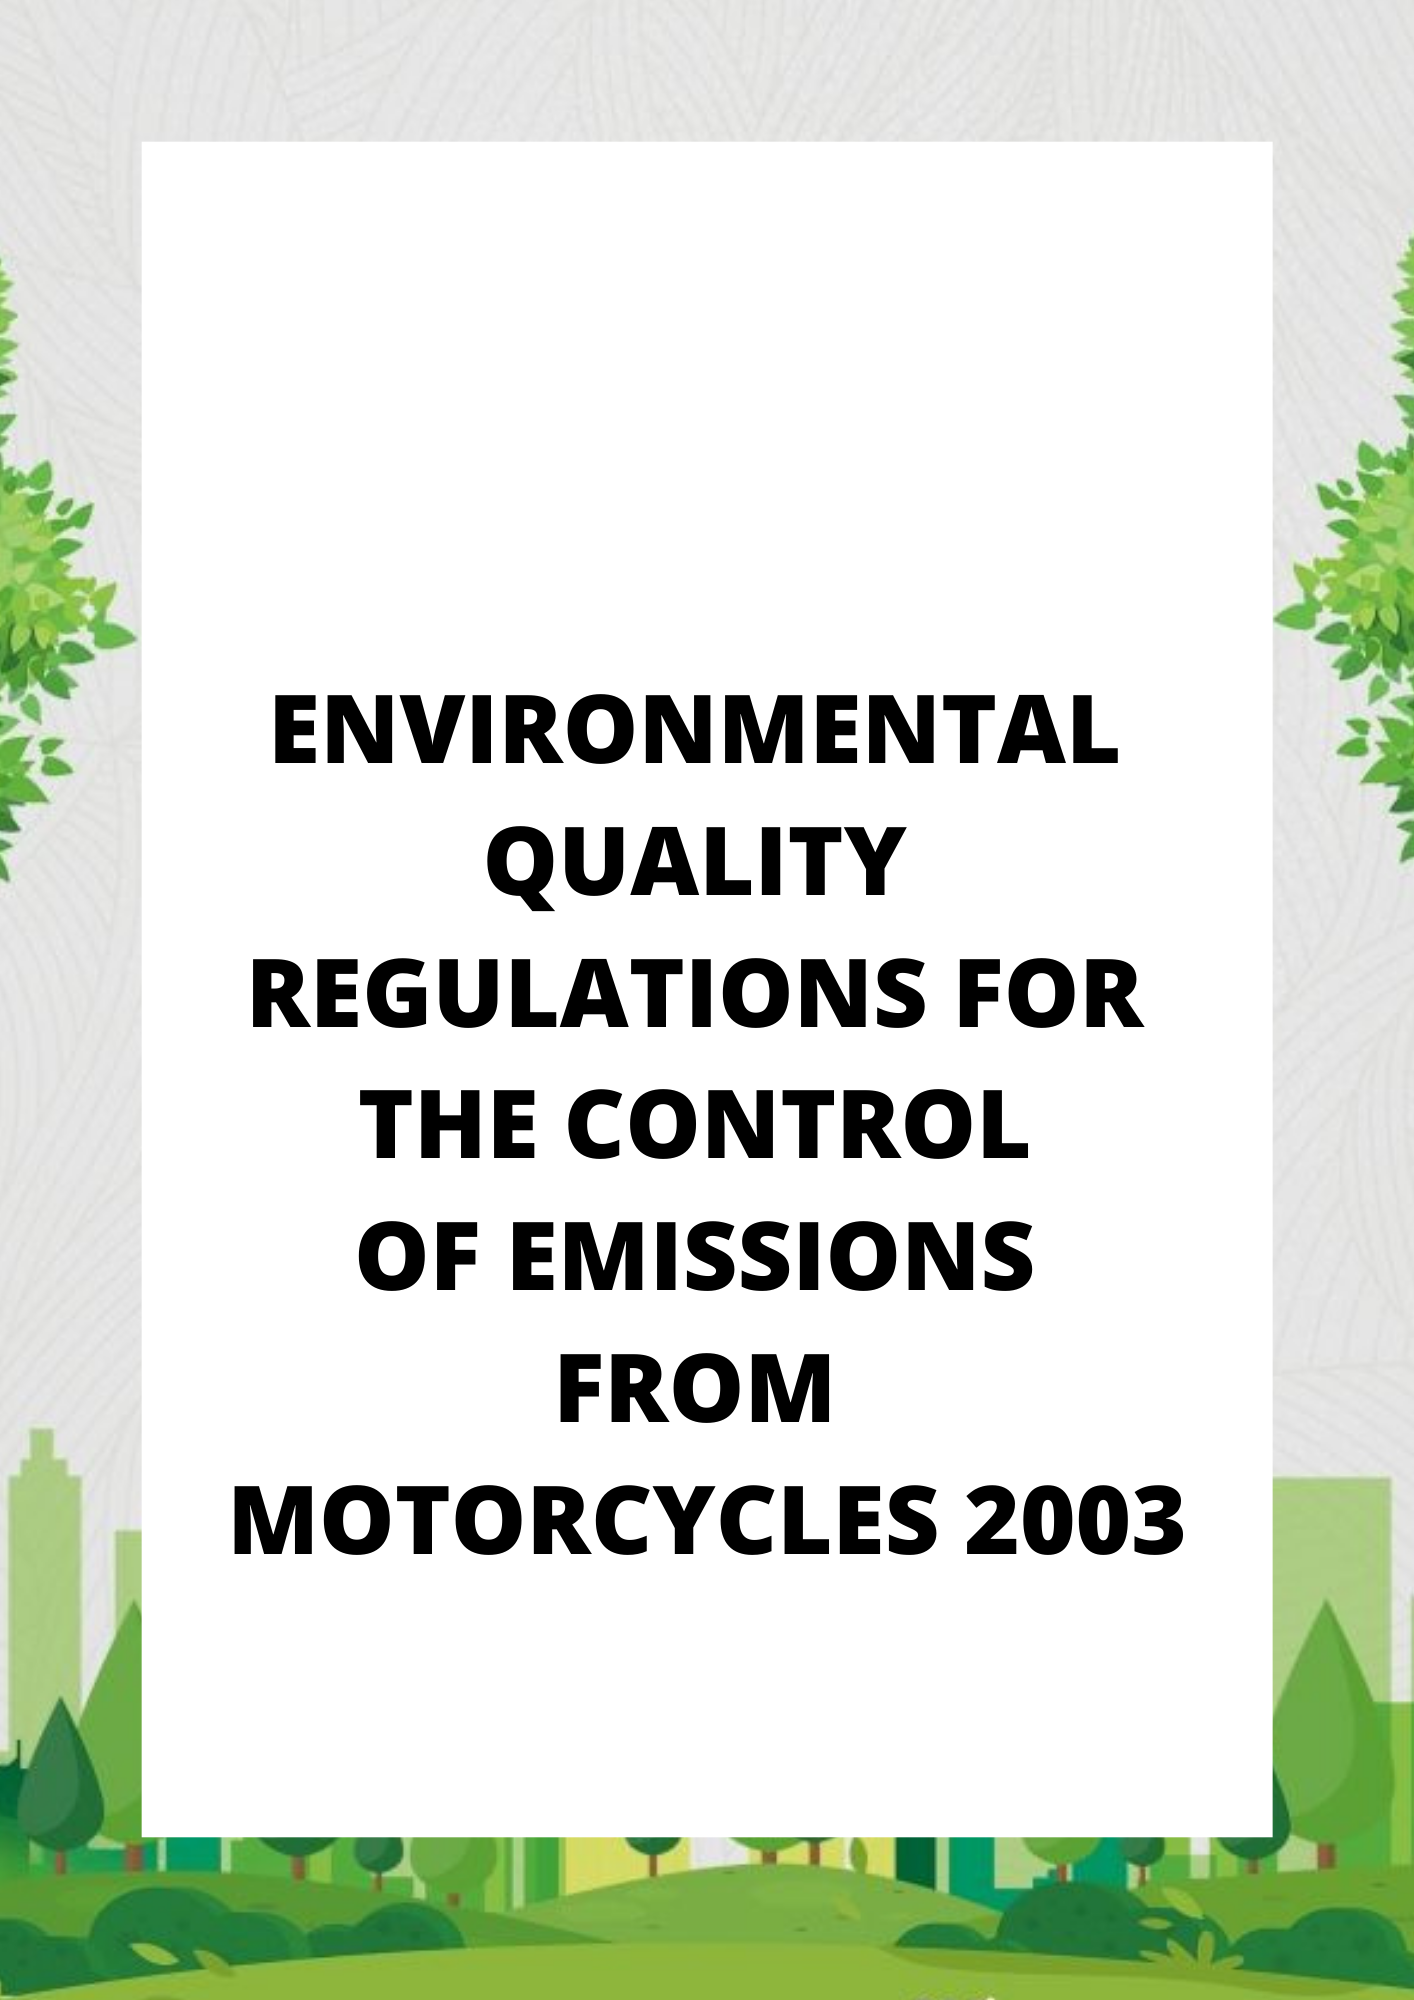 Environmental Quality Regulations for the Control of Emissions from Motorcycles 2003